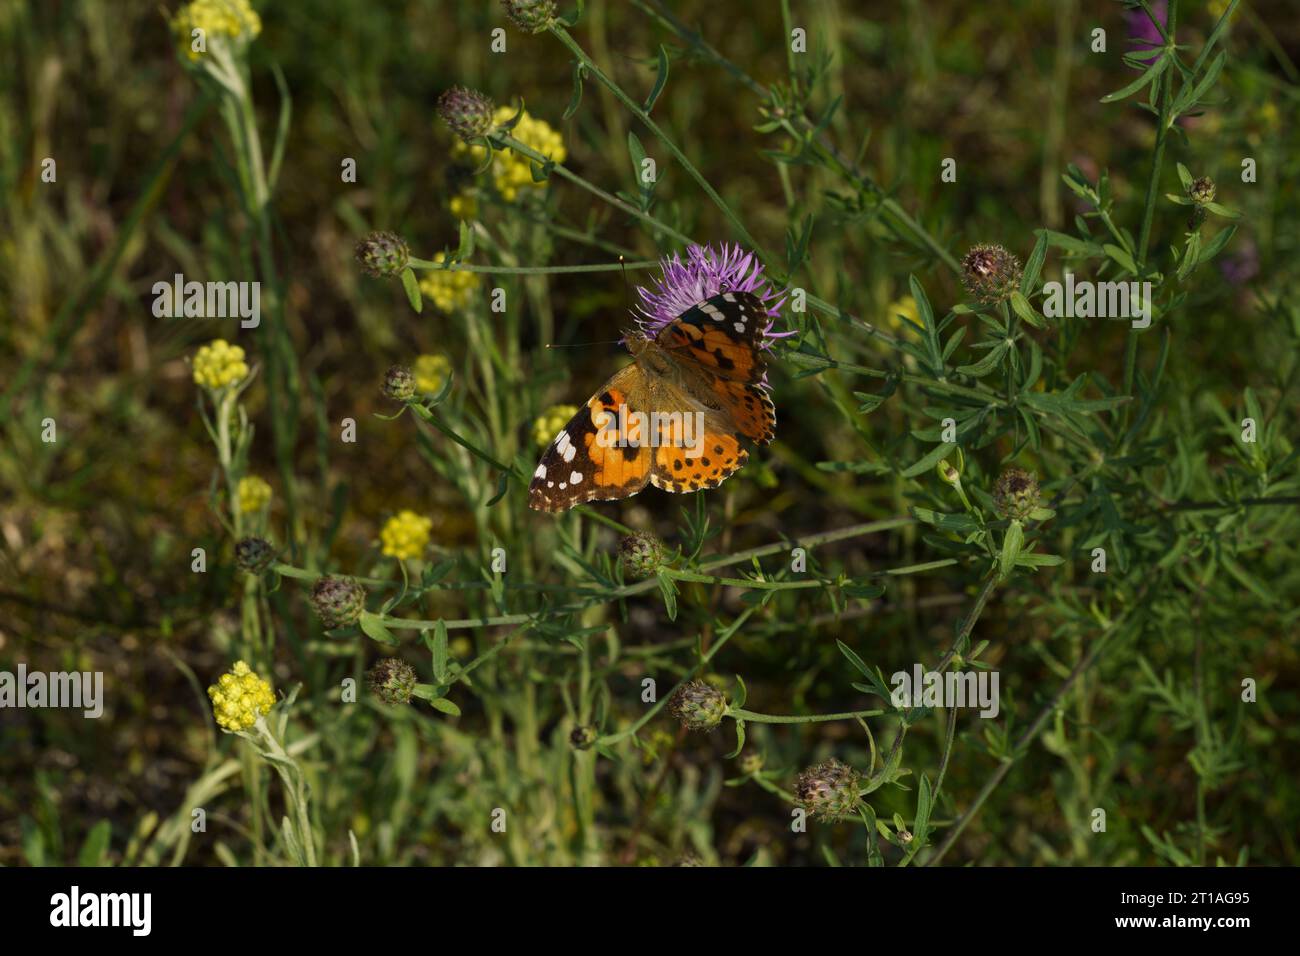 Vanessa cardui Family Nymphalidae Genus Vanessa Painted lady butterfly wild nature insect photography, picture, wallpaper Stock Photo